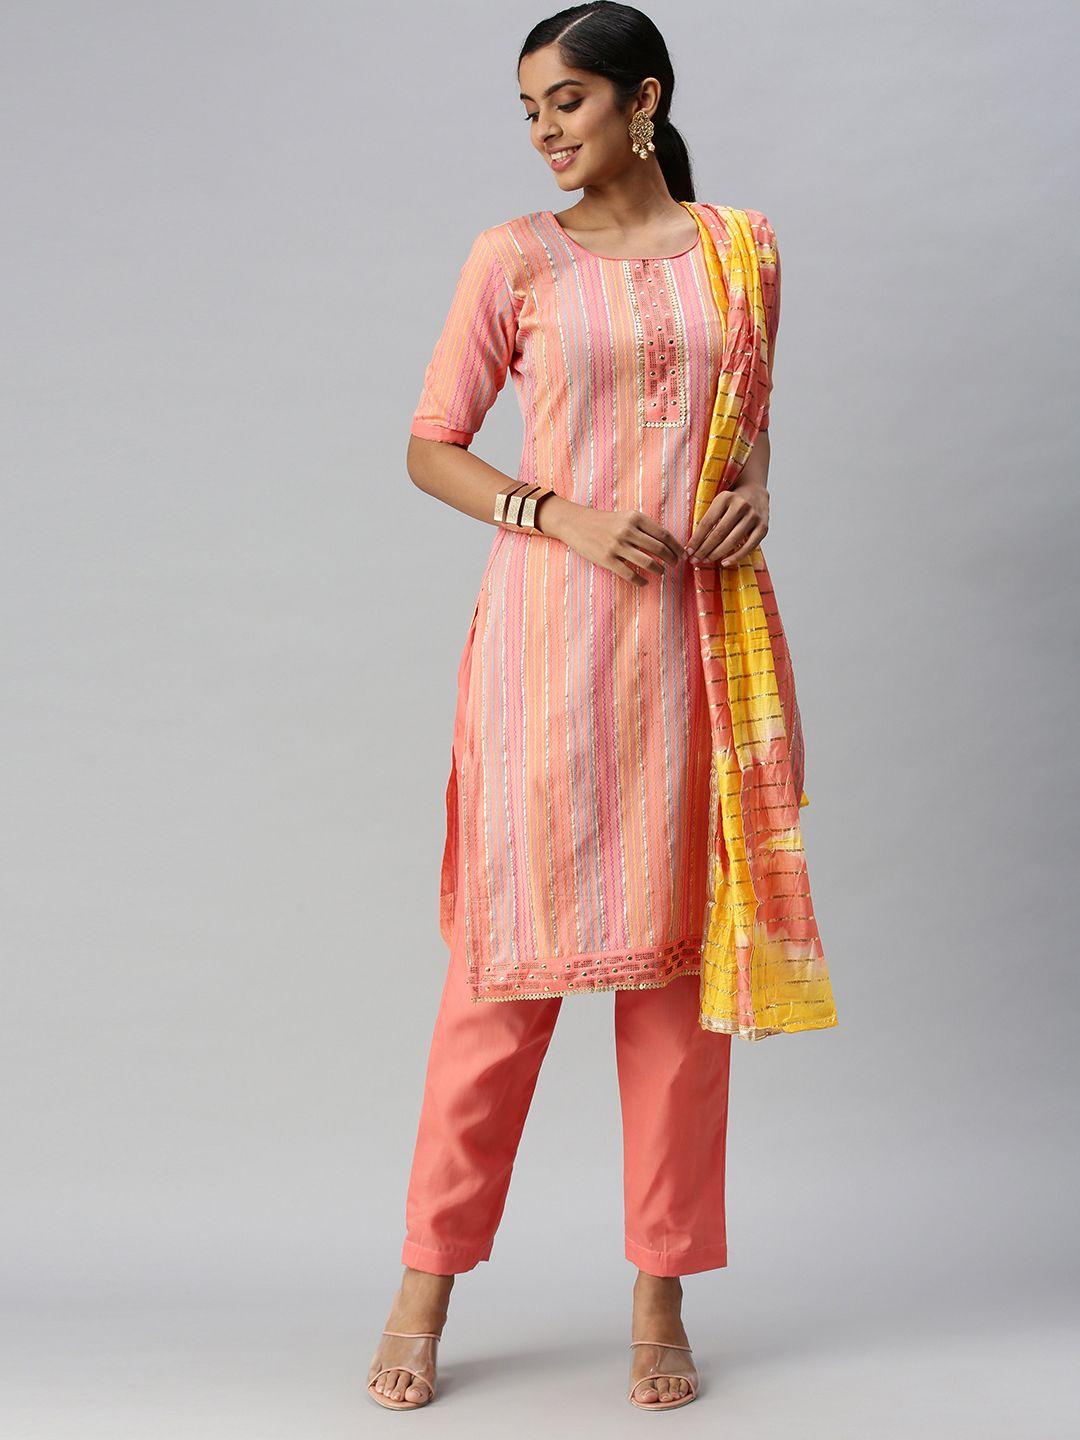 blissta orange & yellow embellished pure cotton unstitched dress material